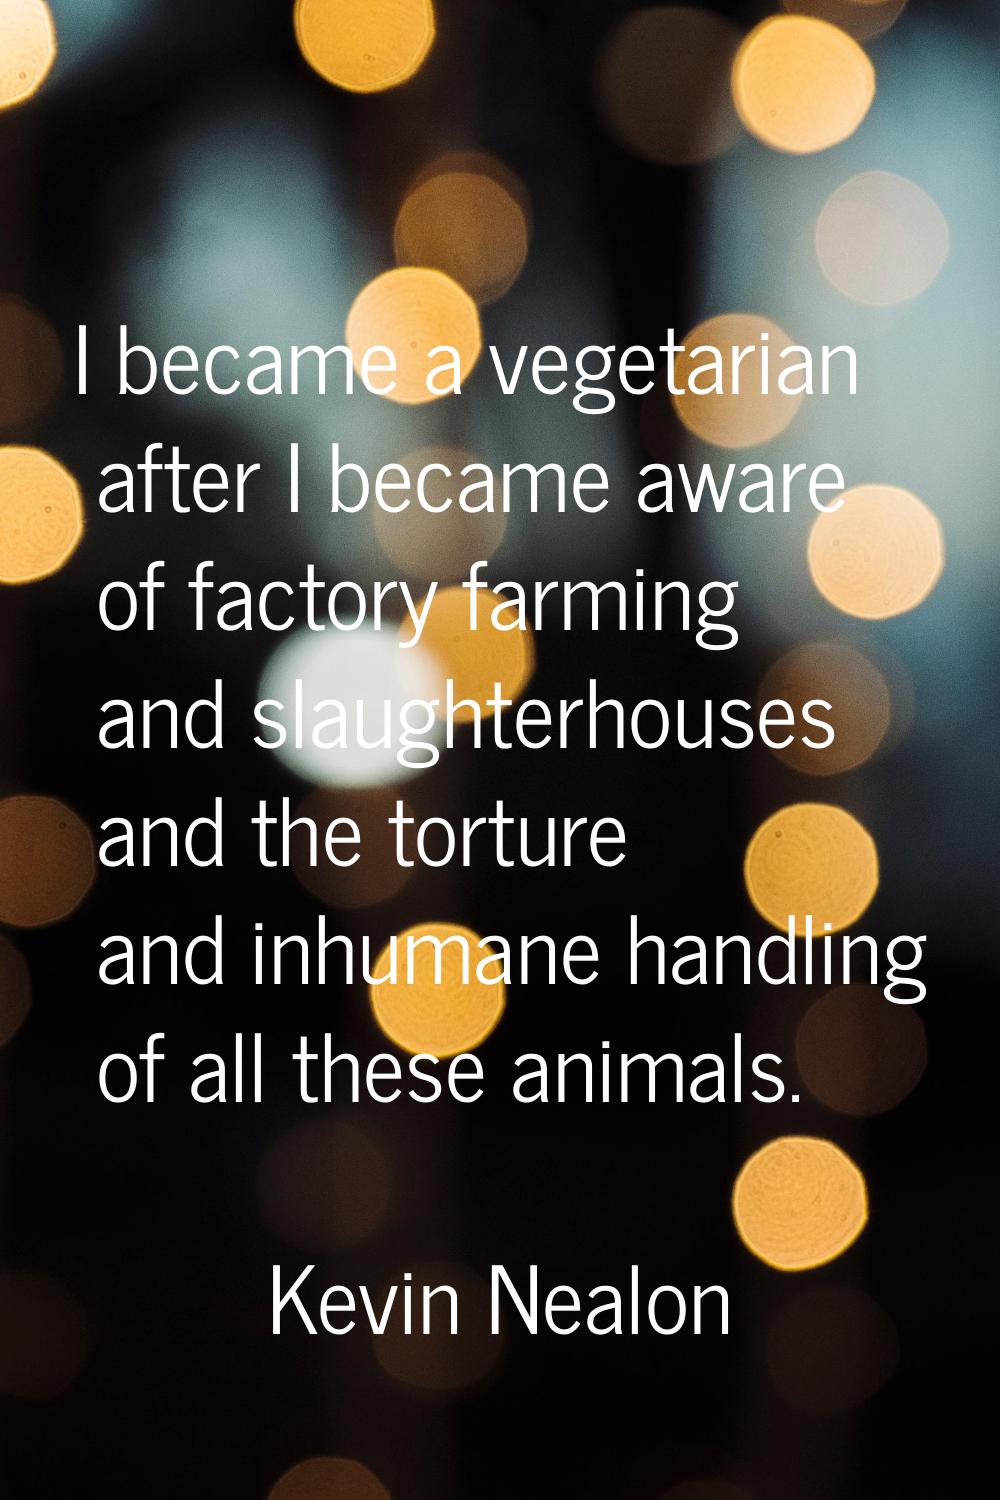 I became a vegetarian after I became aware of factory farming and slaughterhouses and the torture a